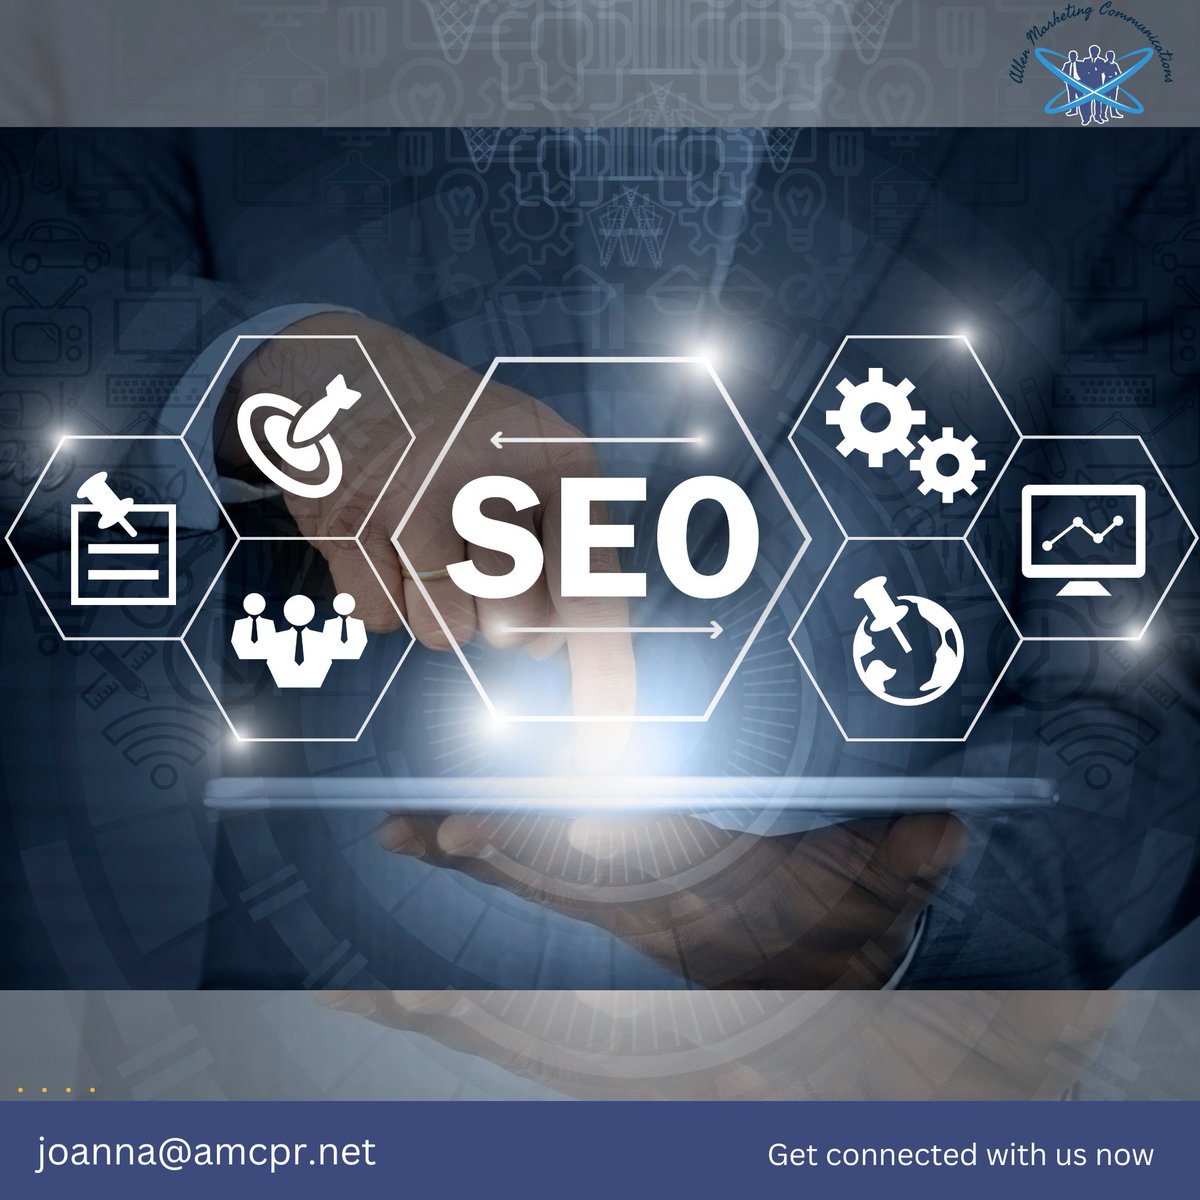 Are you struggling to boost your business’ online visibility? We offer expert Local SEO services to boost your visibility in local searches. Get MORE customers!
amcpr.net/local-seo-serv…
#NYCSEO #localSEO #SupportLocal #GoogleSEO #SearchEngine